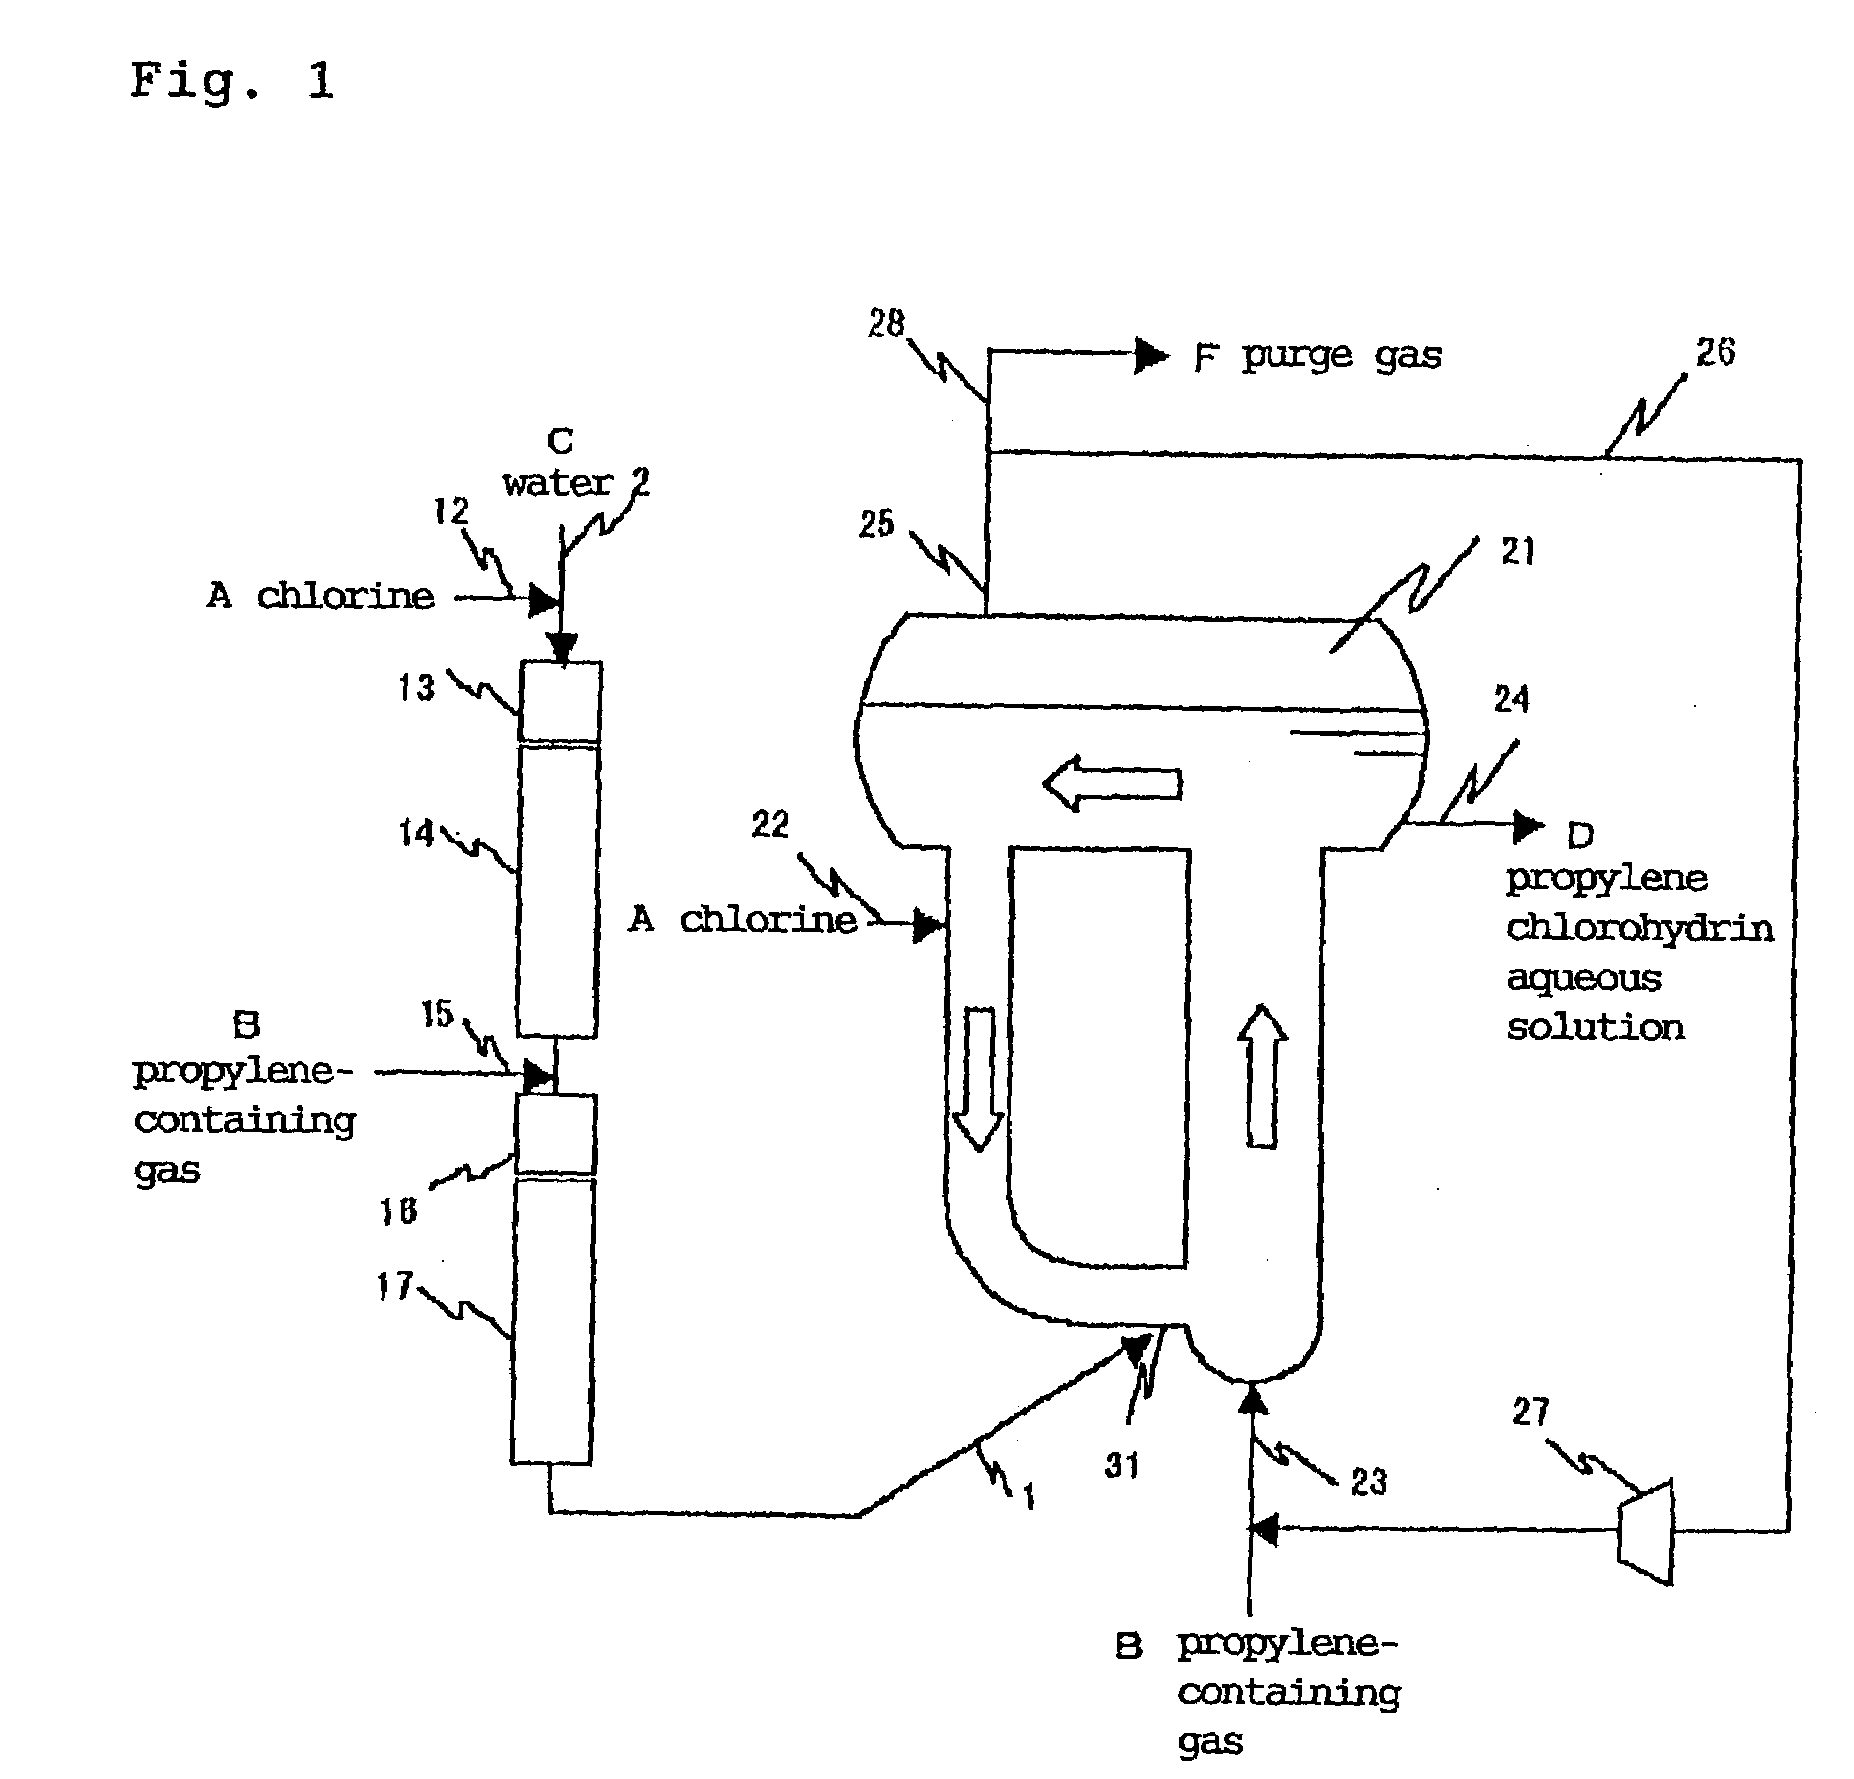 Process for producing propylene chlorohydrin